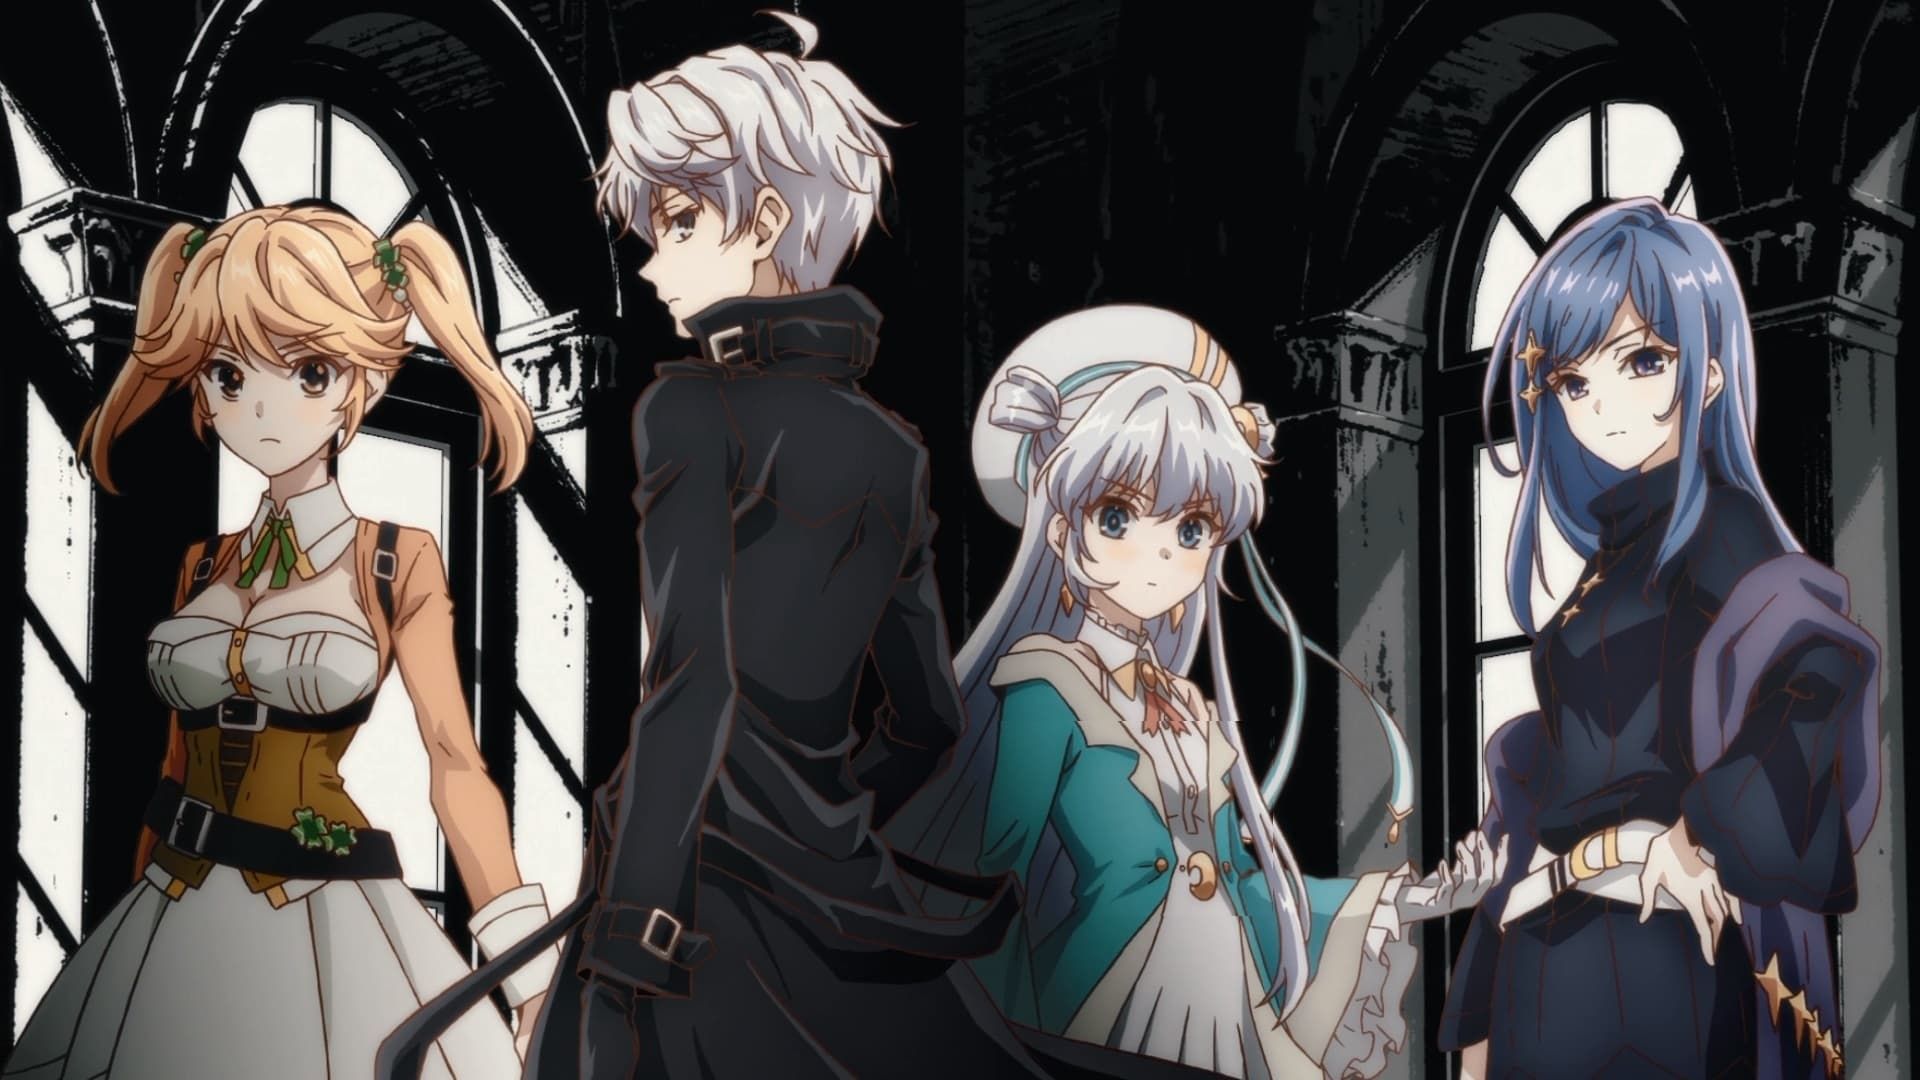 The World's Finest Assassin Gets Reincarnated in Another World as an  Aristocrat Choice of Betrayal - Watch on Crunchyroll